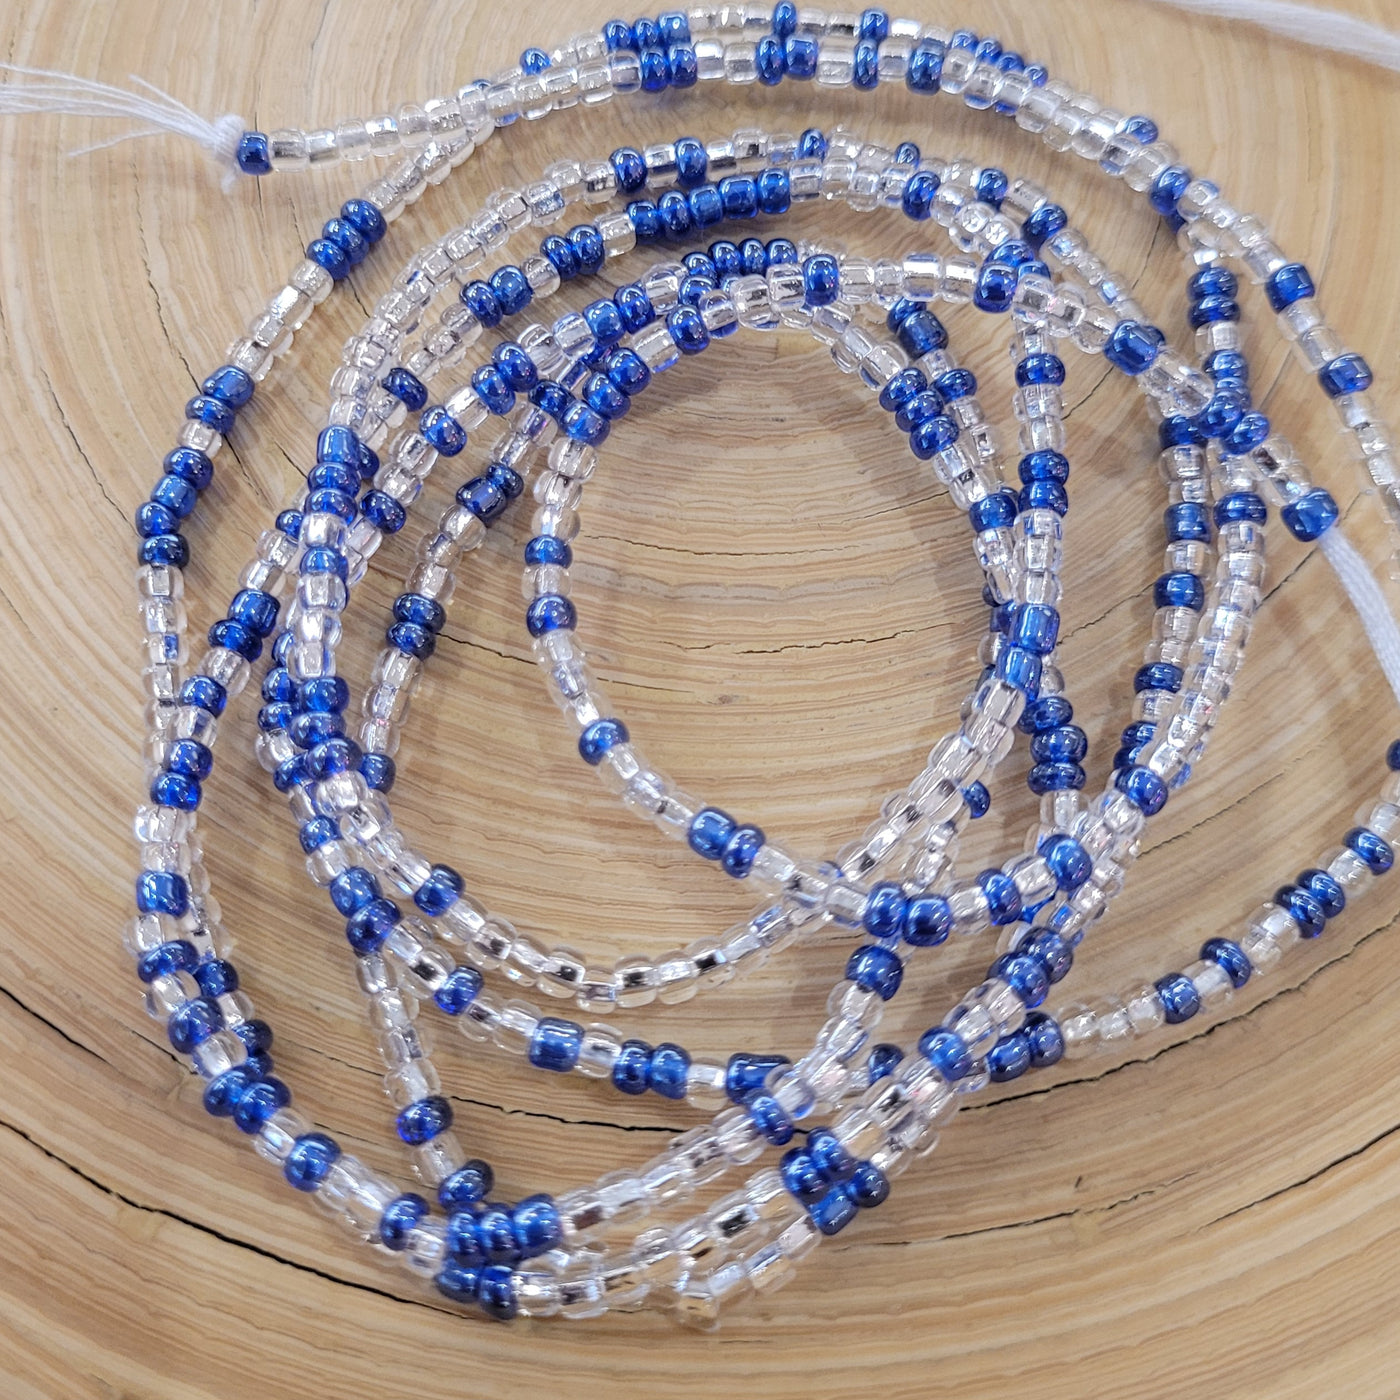 Two Toned "Blue and Clear" Waist Beads